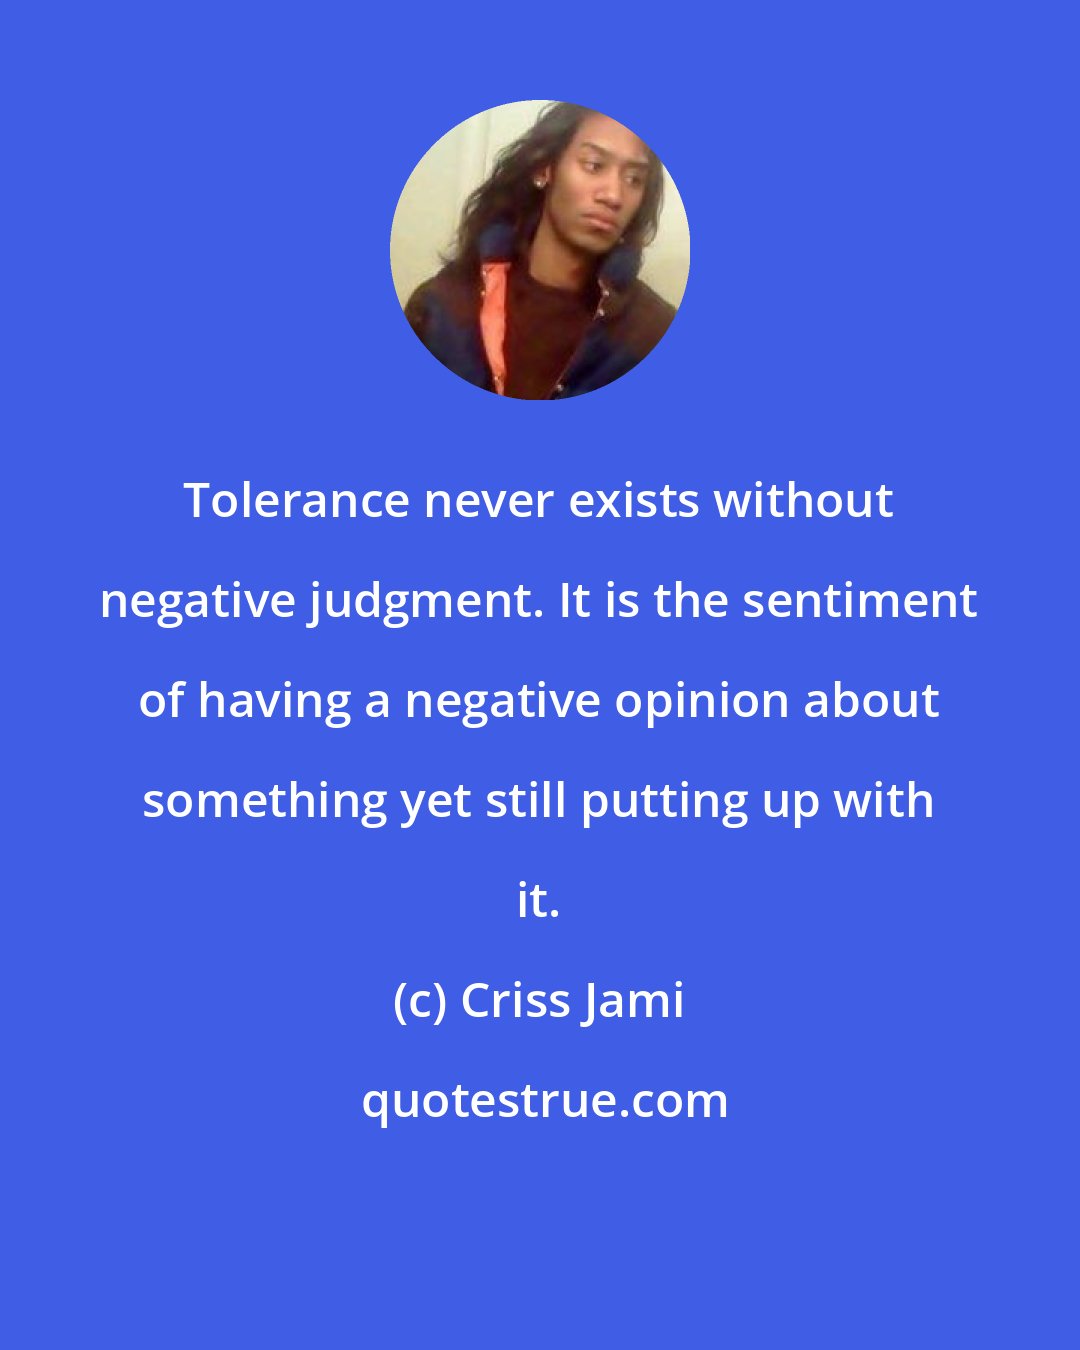 Criss Jami: Tolerance never exists without negative judgment. It is the sentiment of having a negative opinion about something yet still putting up with it.